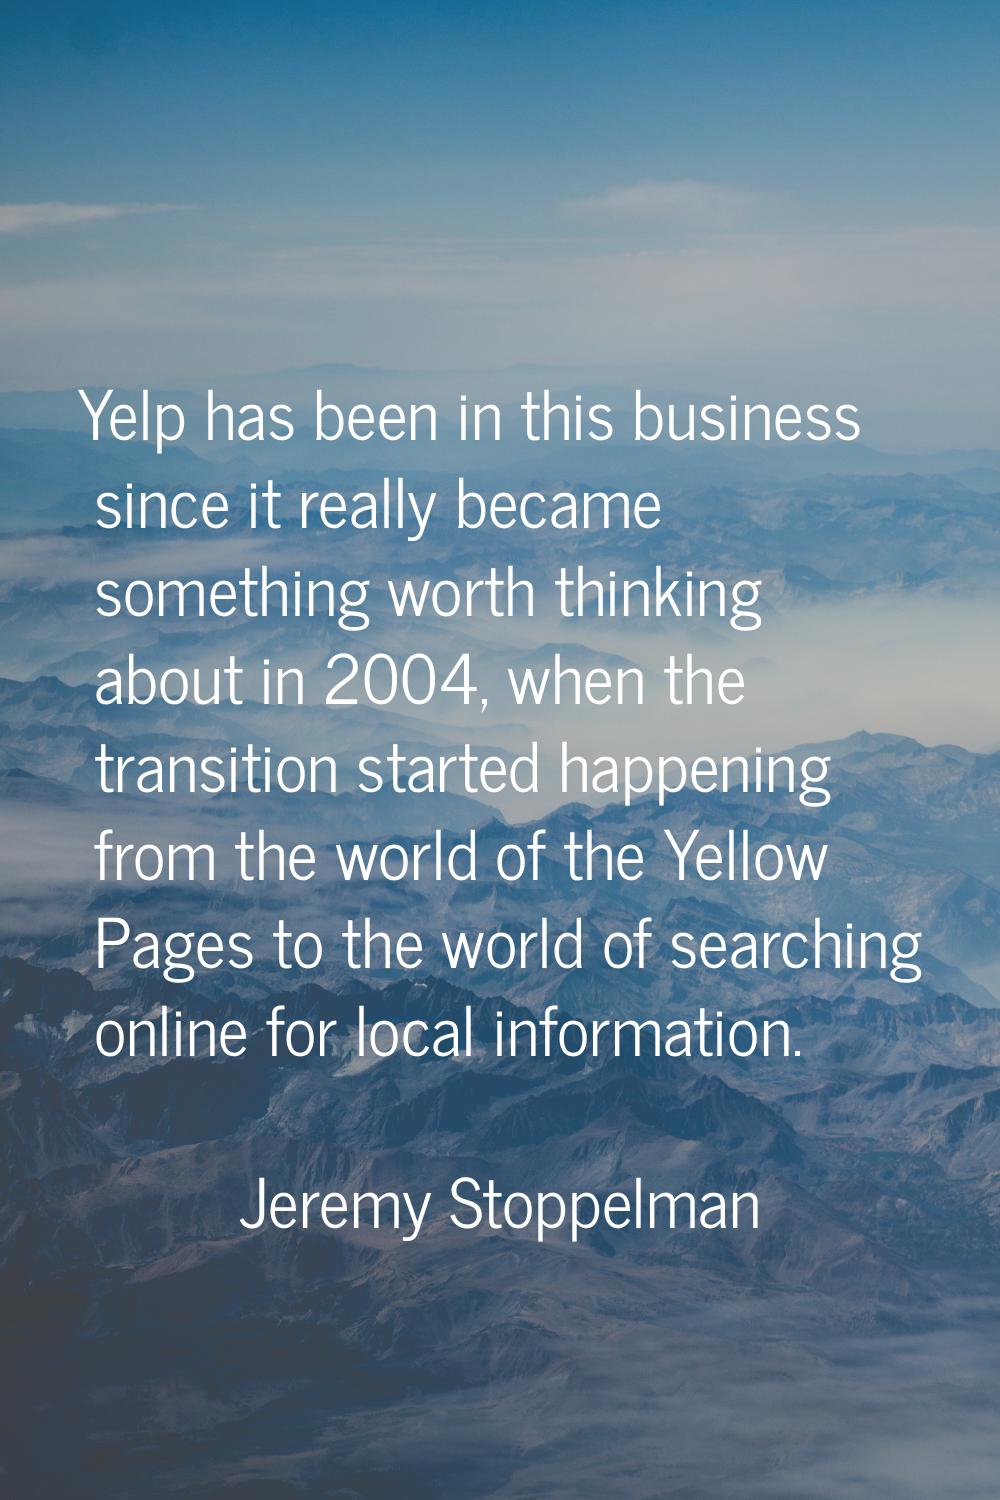 Yelp has been in this business since it really became something worth thinking about in 2004, when 